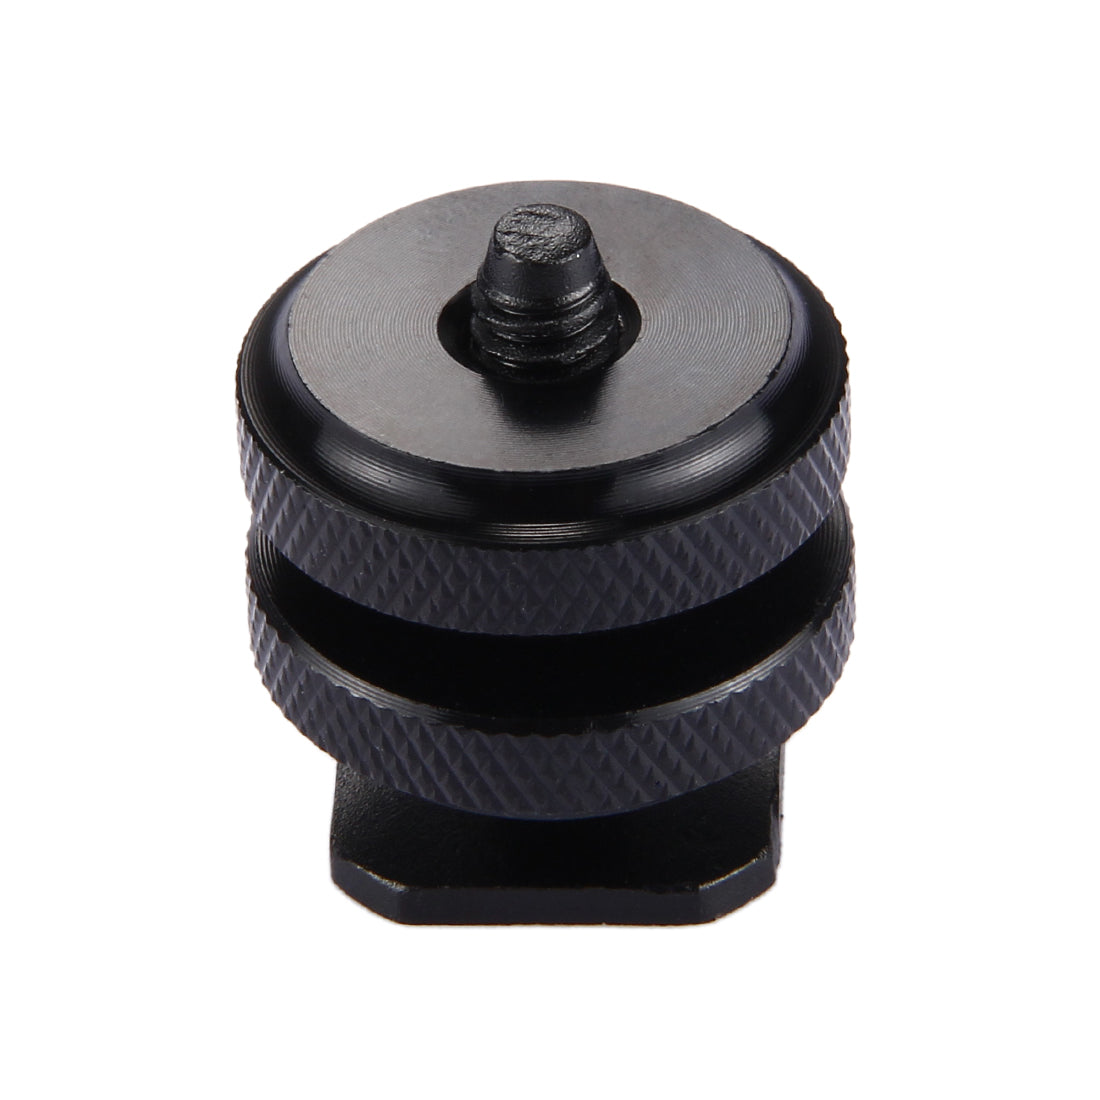 Hot Shoe Screw Adapter with Double Nut for DSLR Cameras GoPro HERO5 4 3 2 1